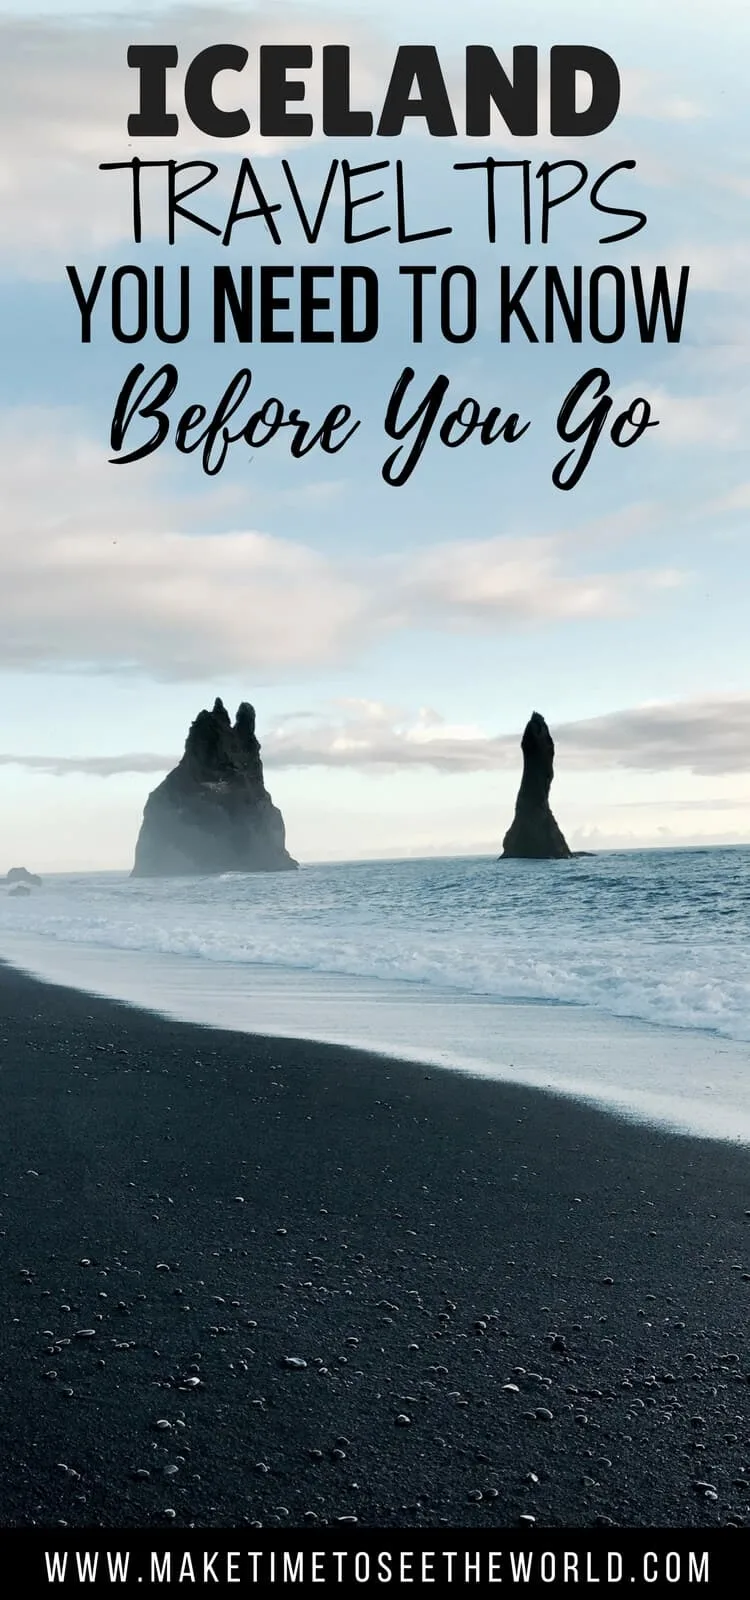 Traveling to Iceland - Grab these Iceland Travel Tips before you go!